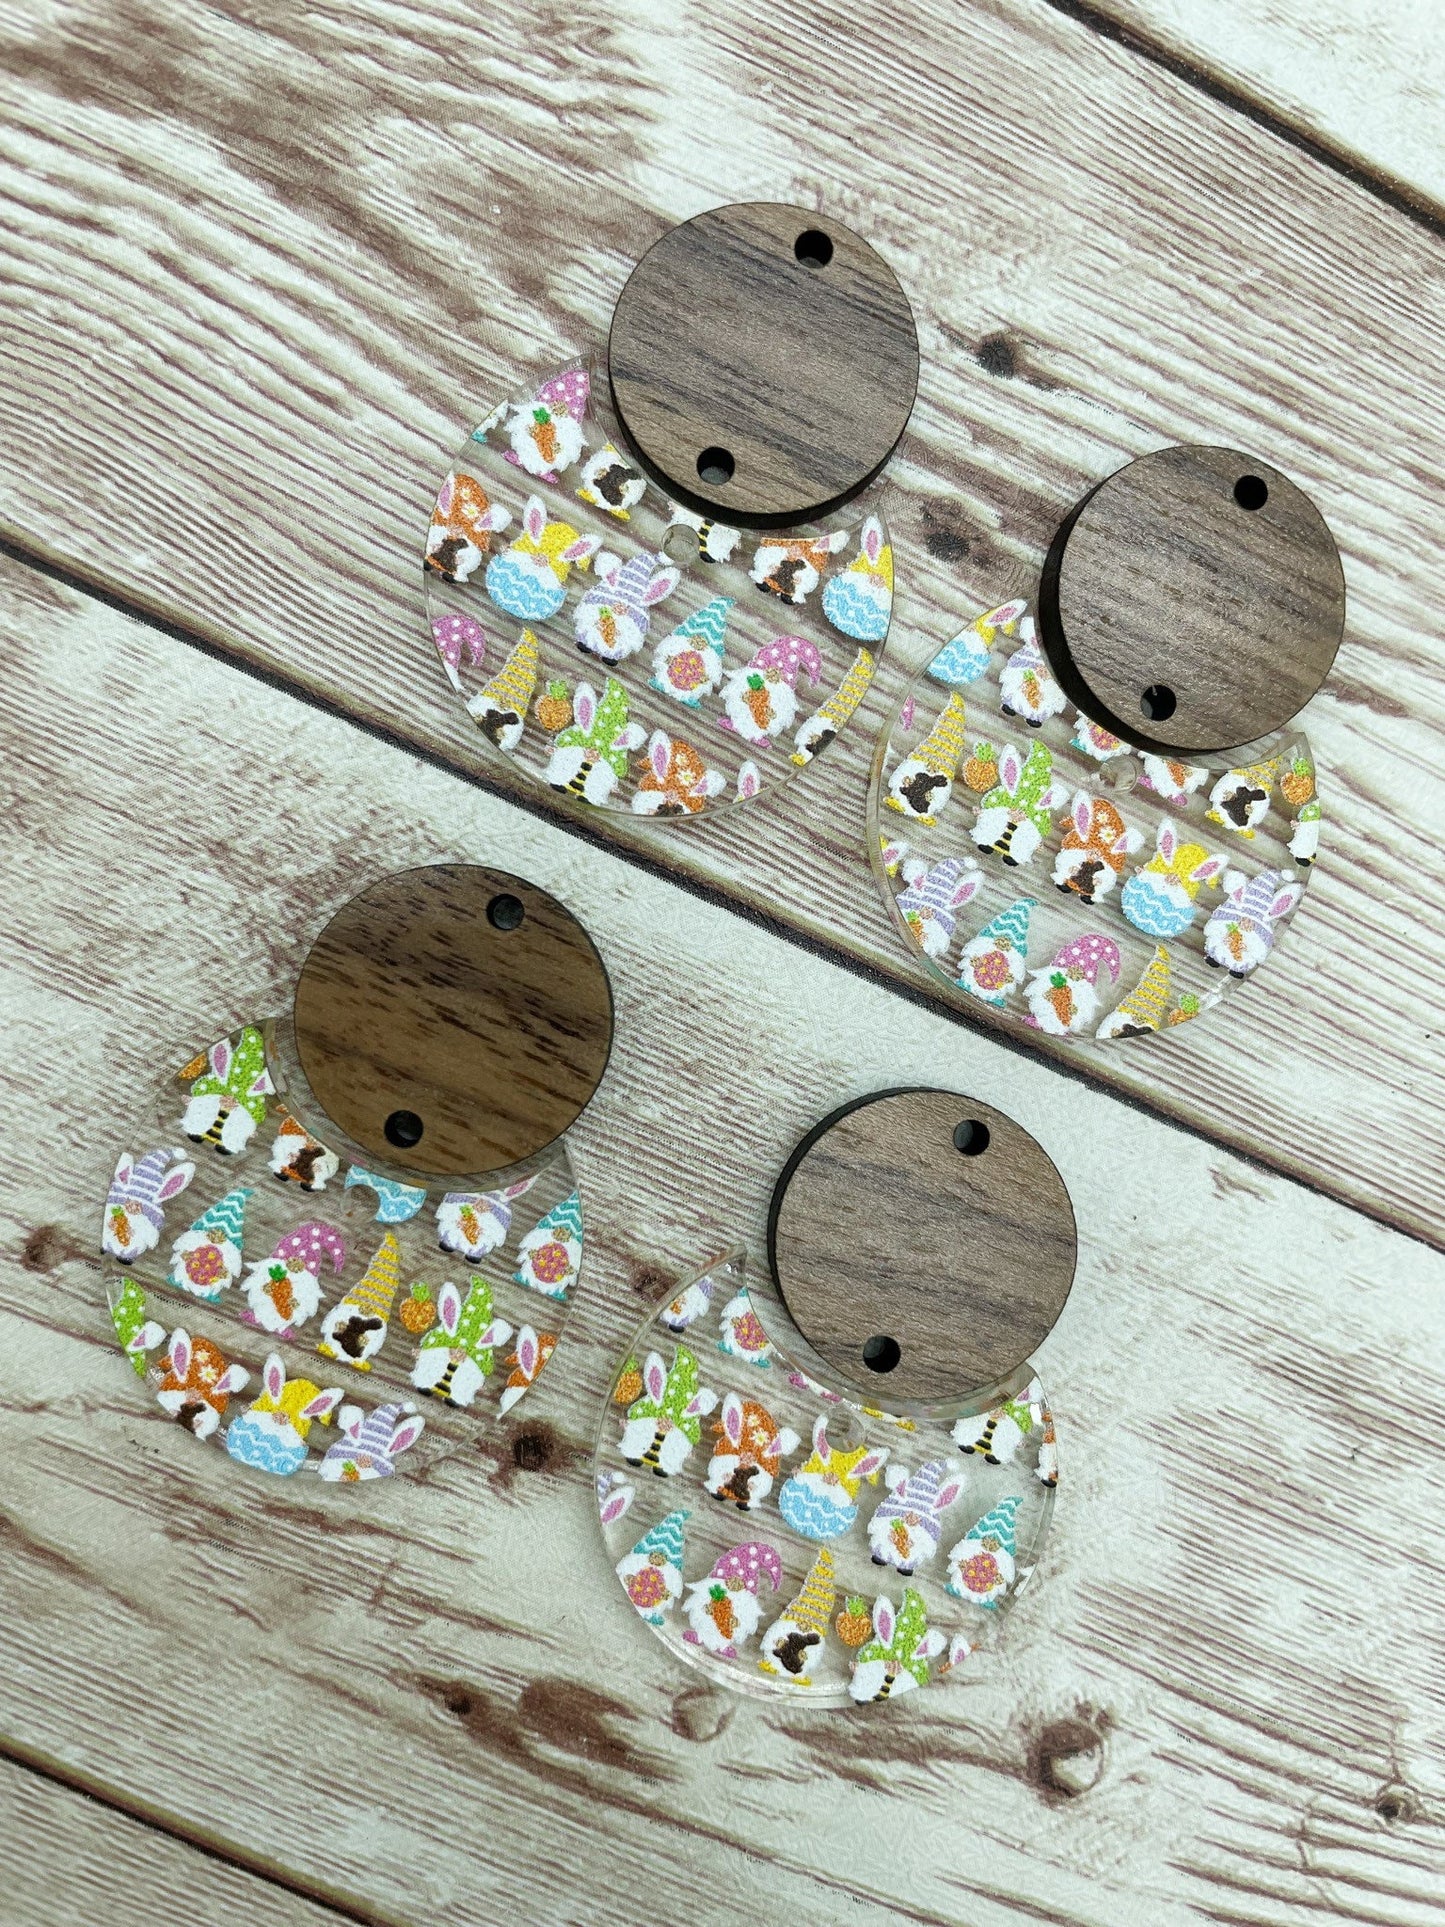 Patterned Easter Bunny Rabbit Gnome Print Acrylic and Wood Circle Set Earring Blanks, DIY Jewelry Making